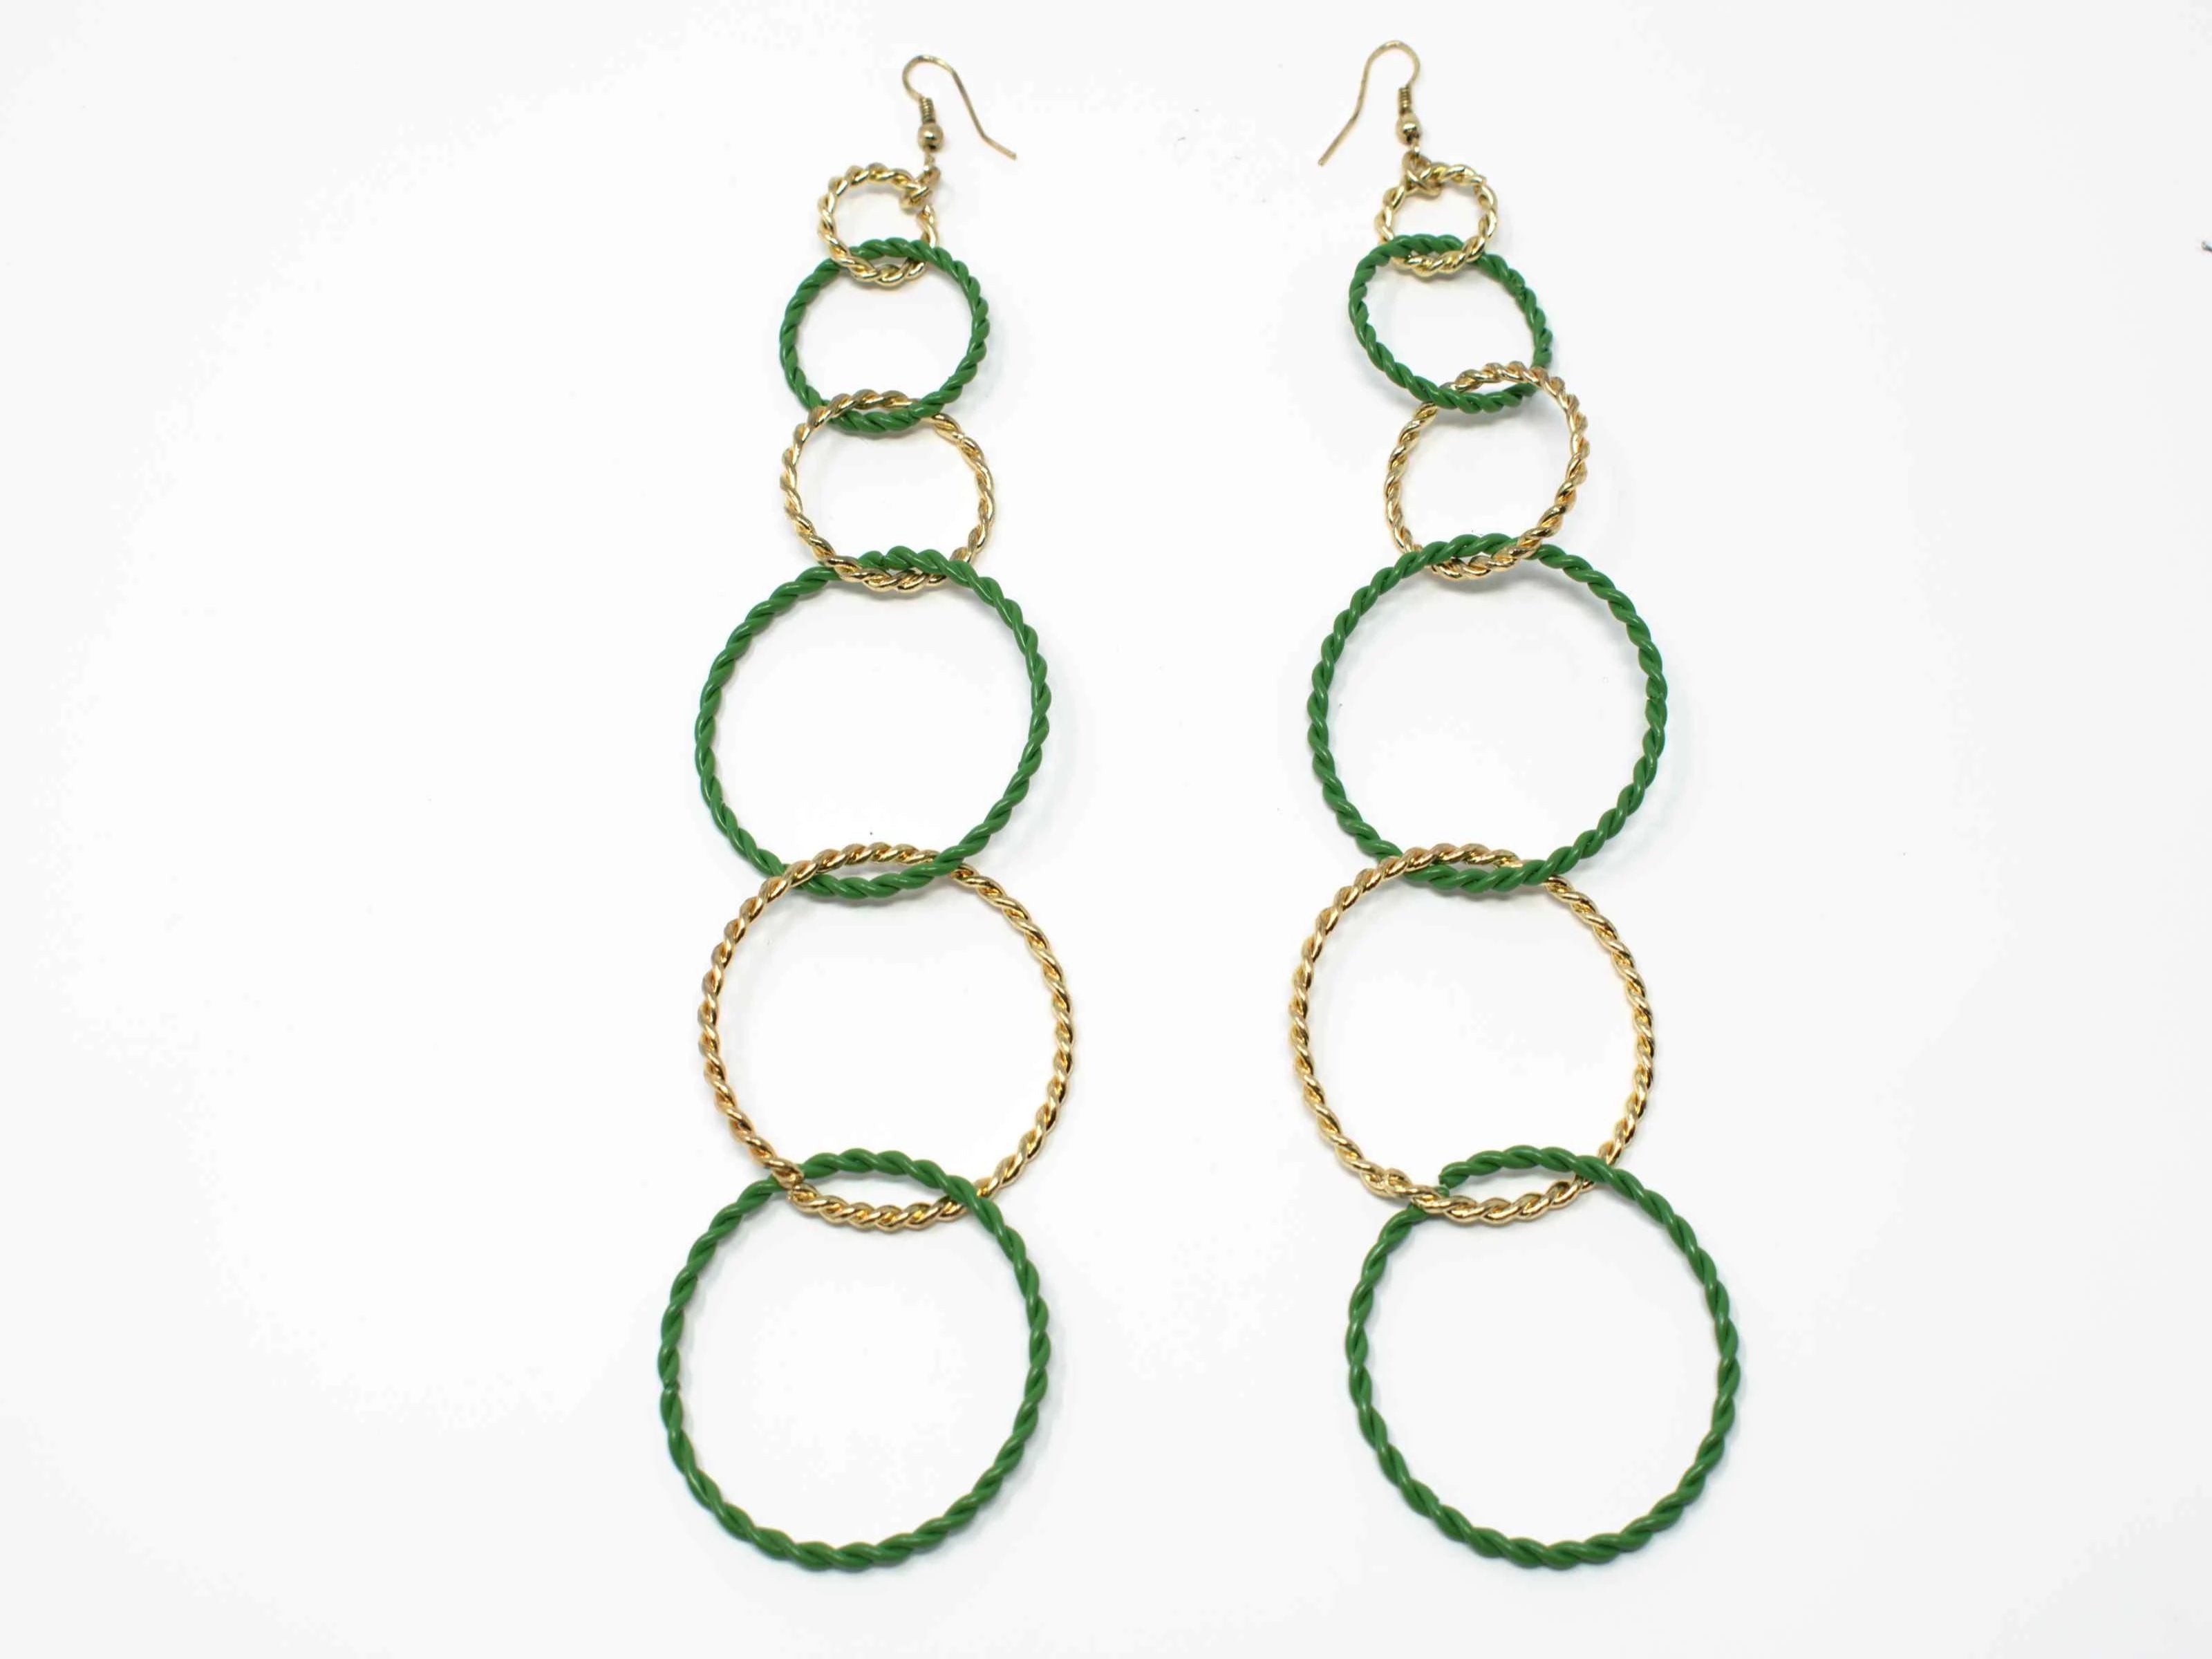 Terry Gold and Green Earrings